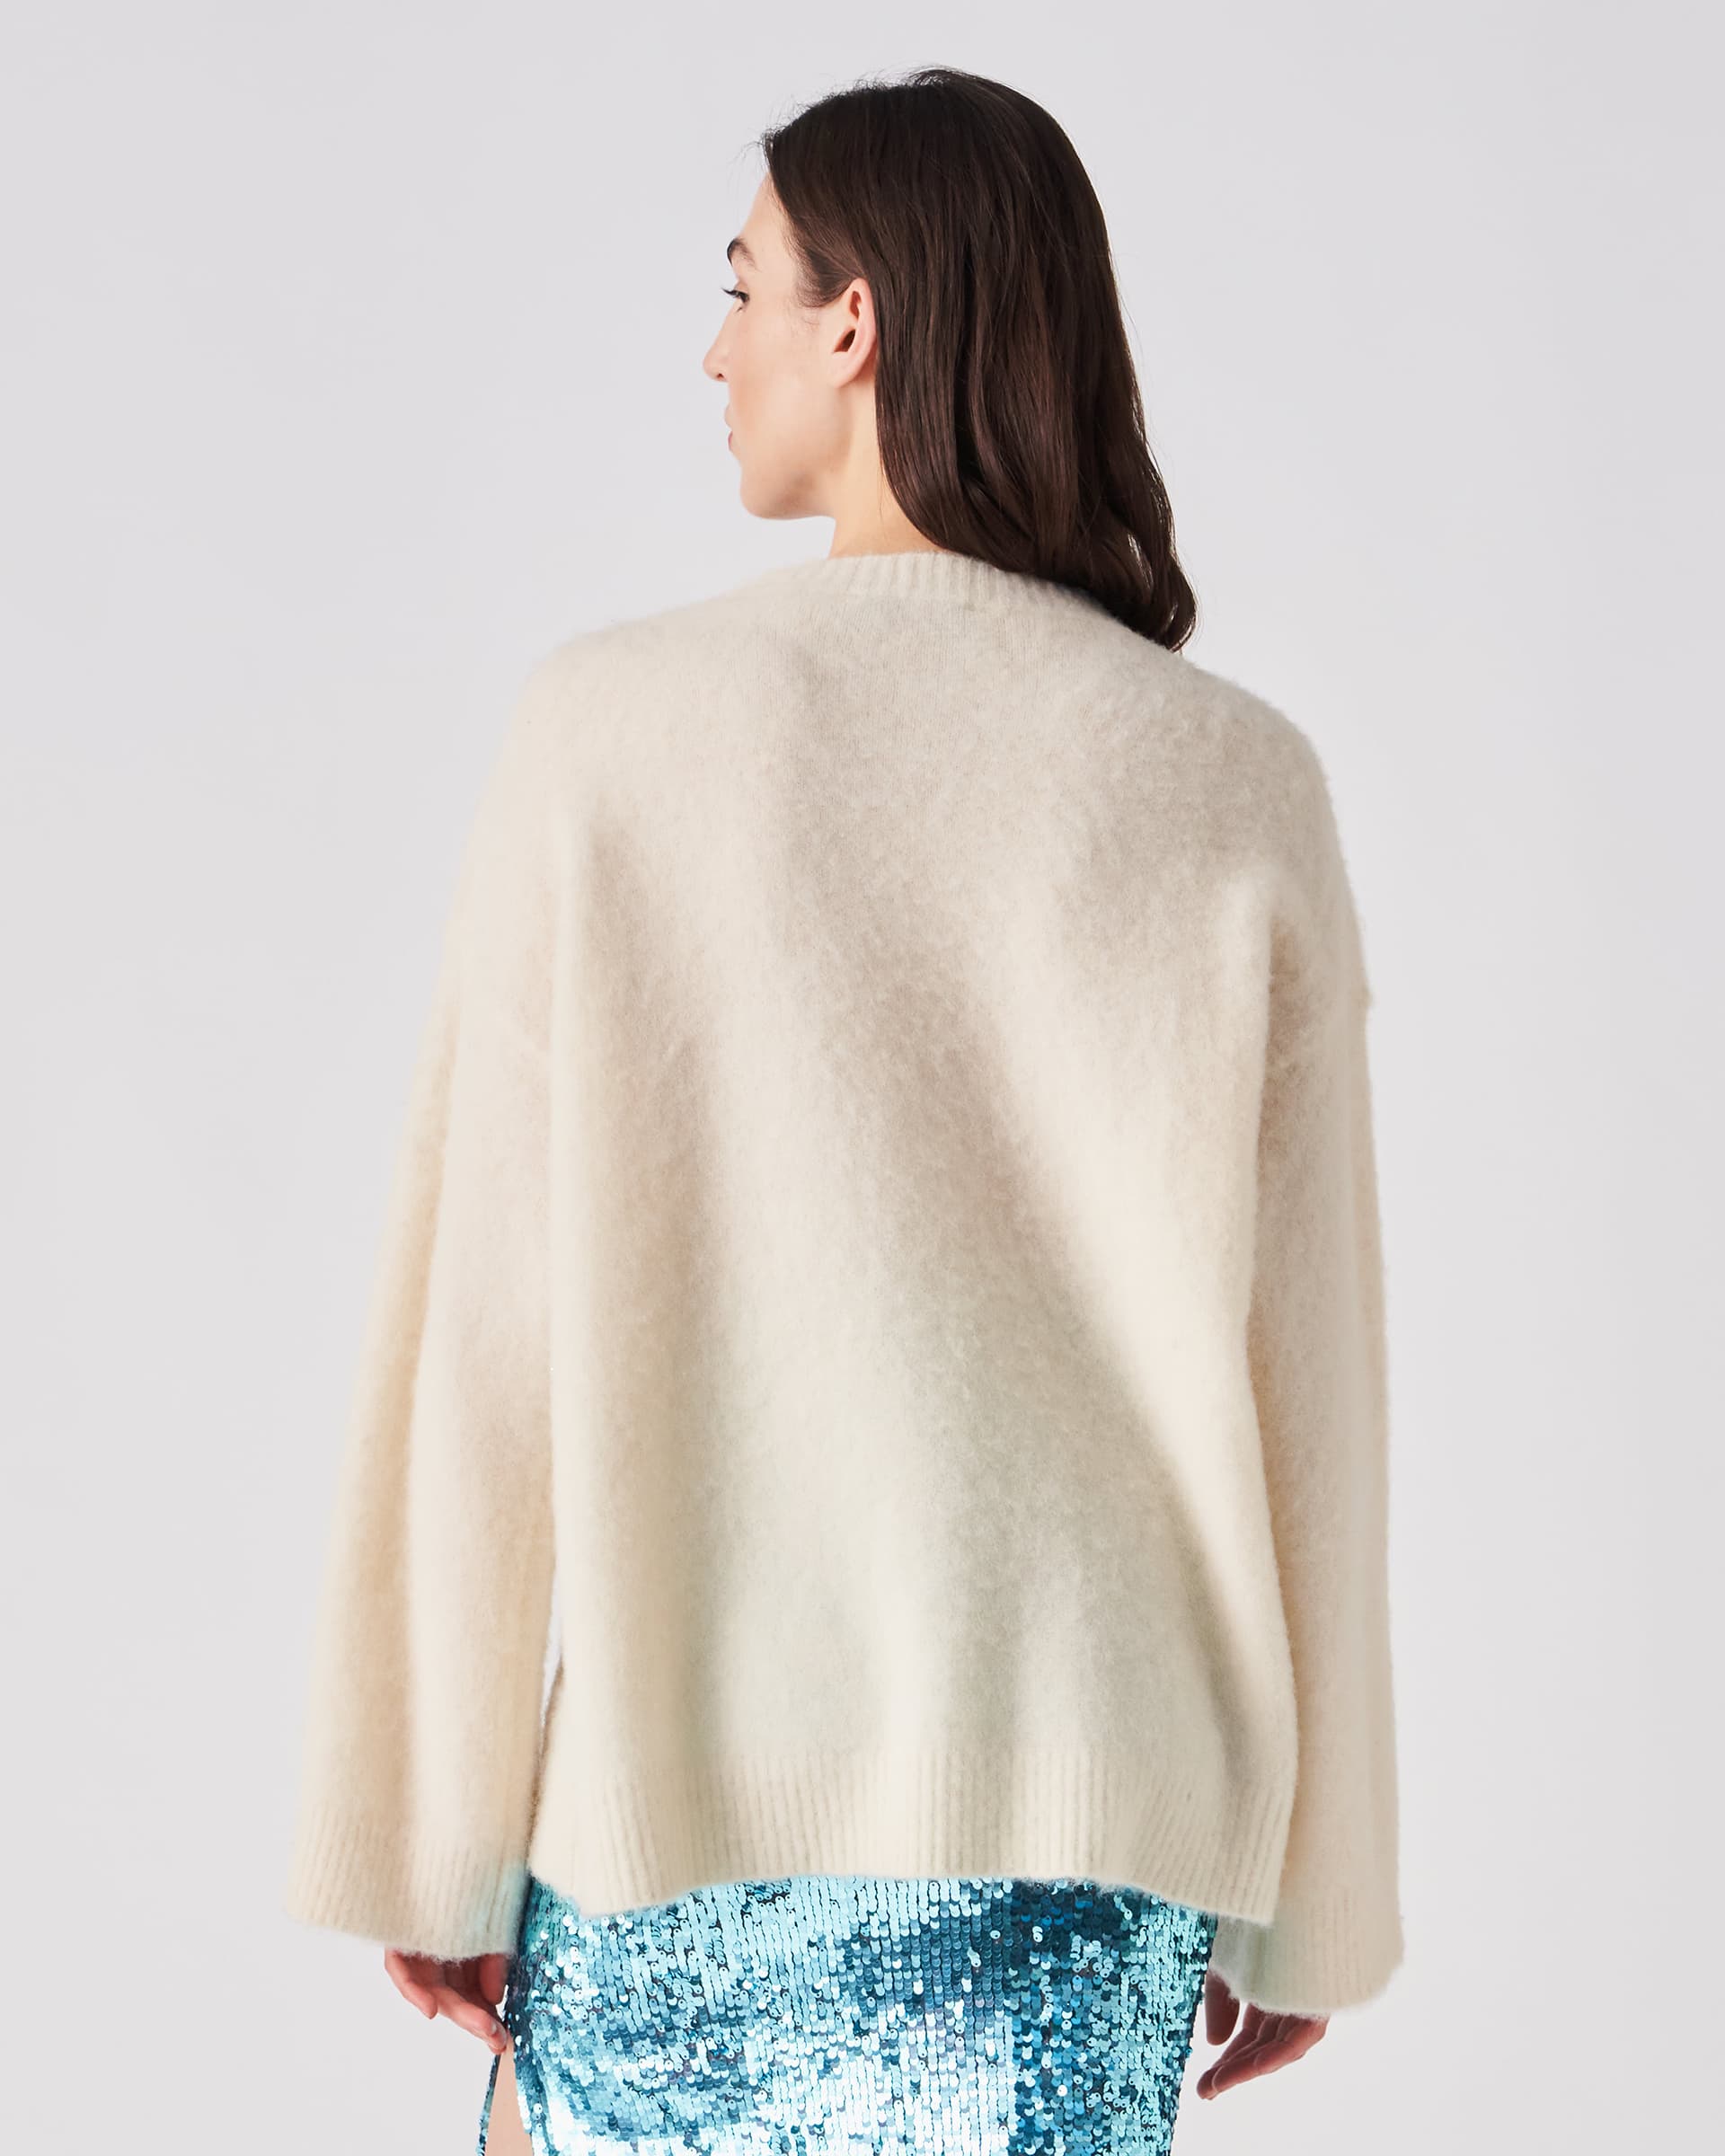 The Market Store | Over Neck Sweater